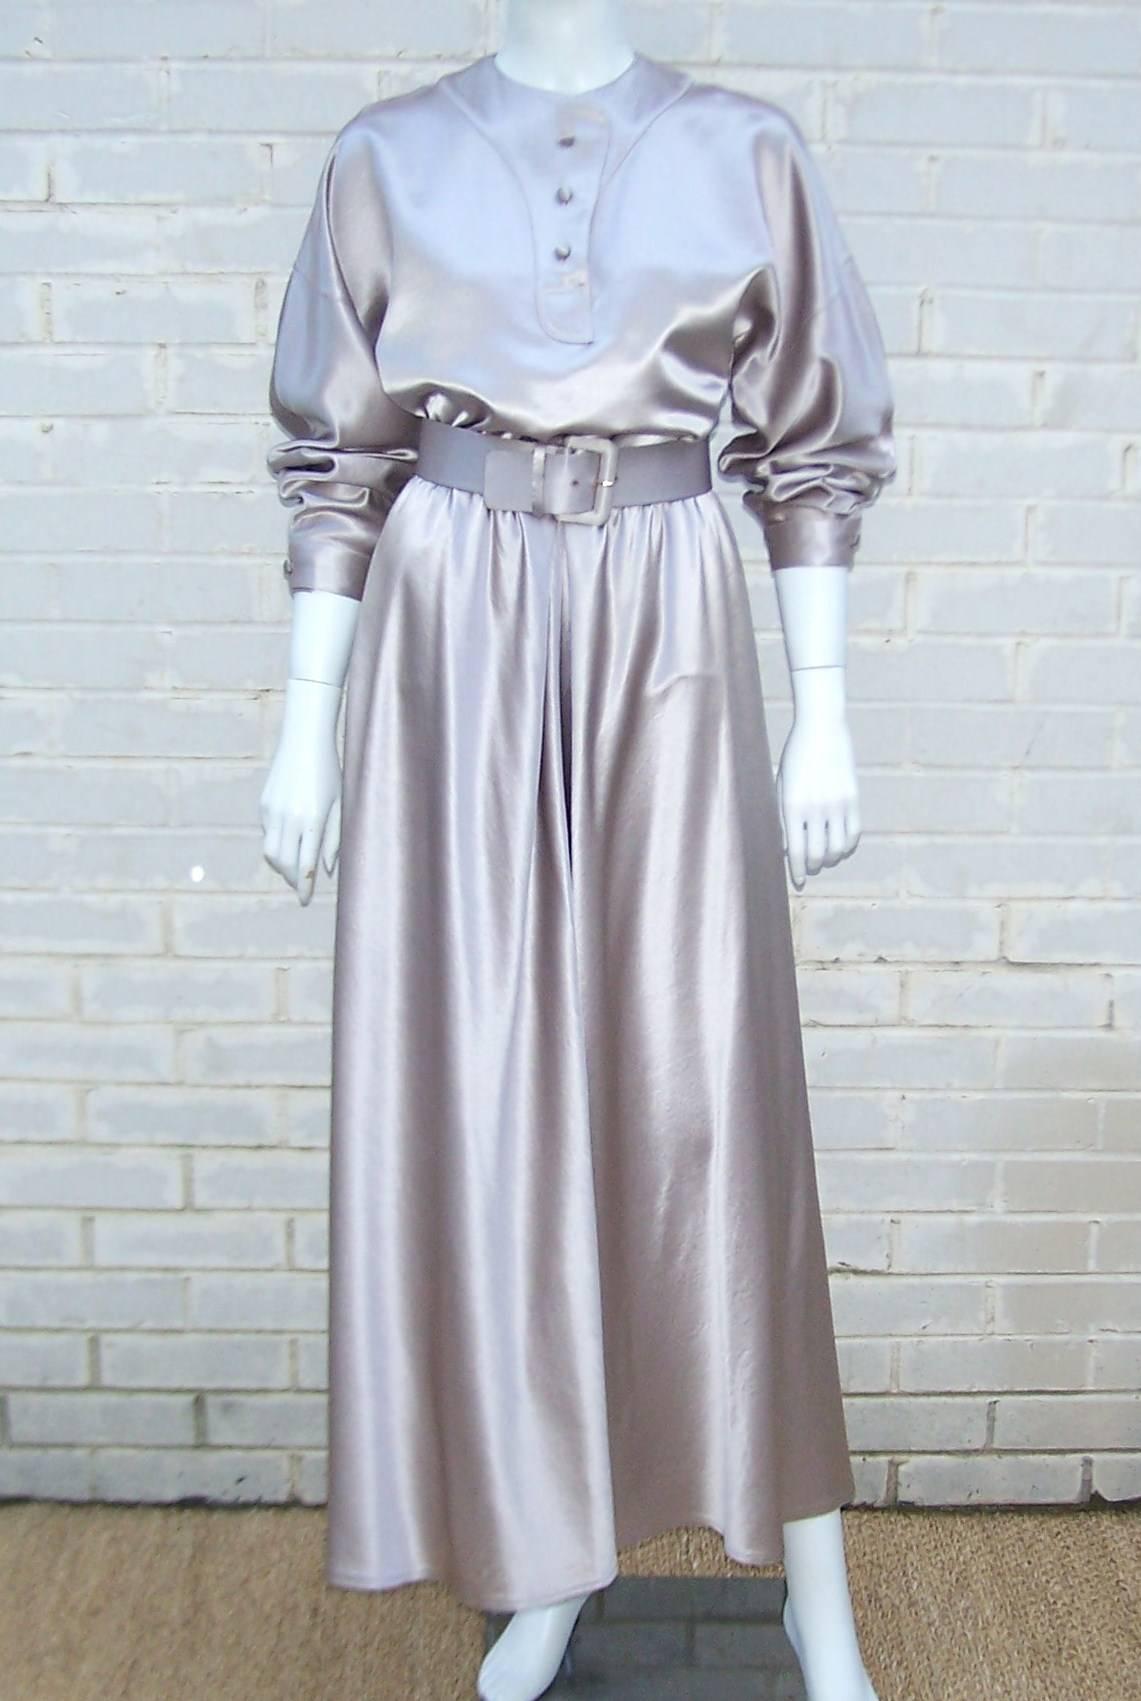 This Geoffrey Beene two piece ensemble is reminiscent of the sci fi films of the 1970's...Star Wars, Logan's Run...even Diane Keaton;s wardrobe in Sleepers.  The gorgeous platinum silver fabric feels like a wool blend with a disco era sheen for